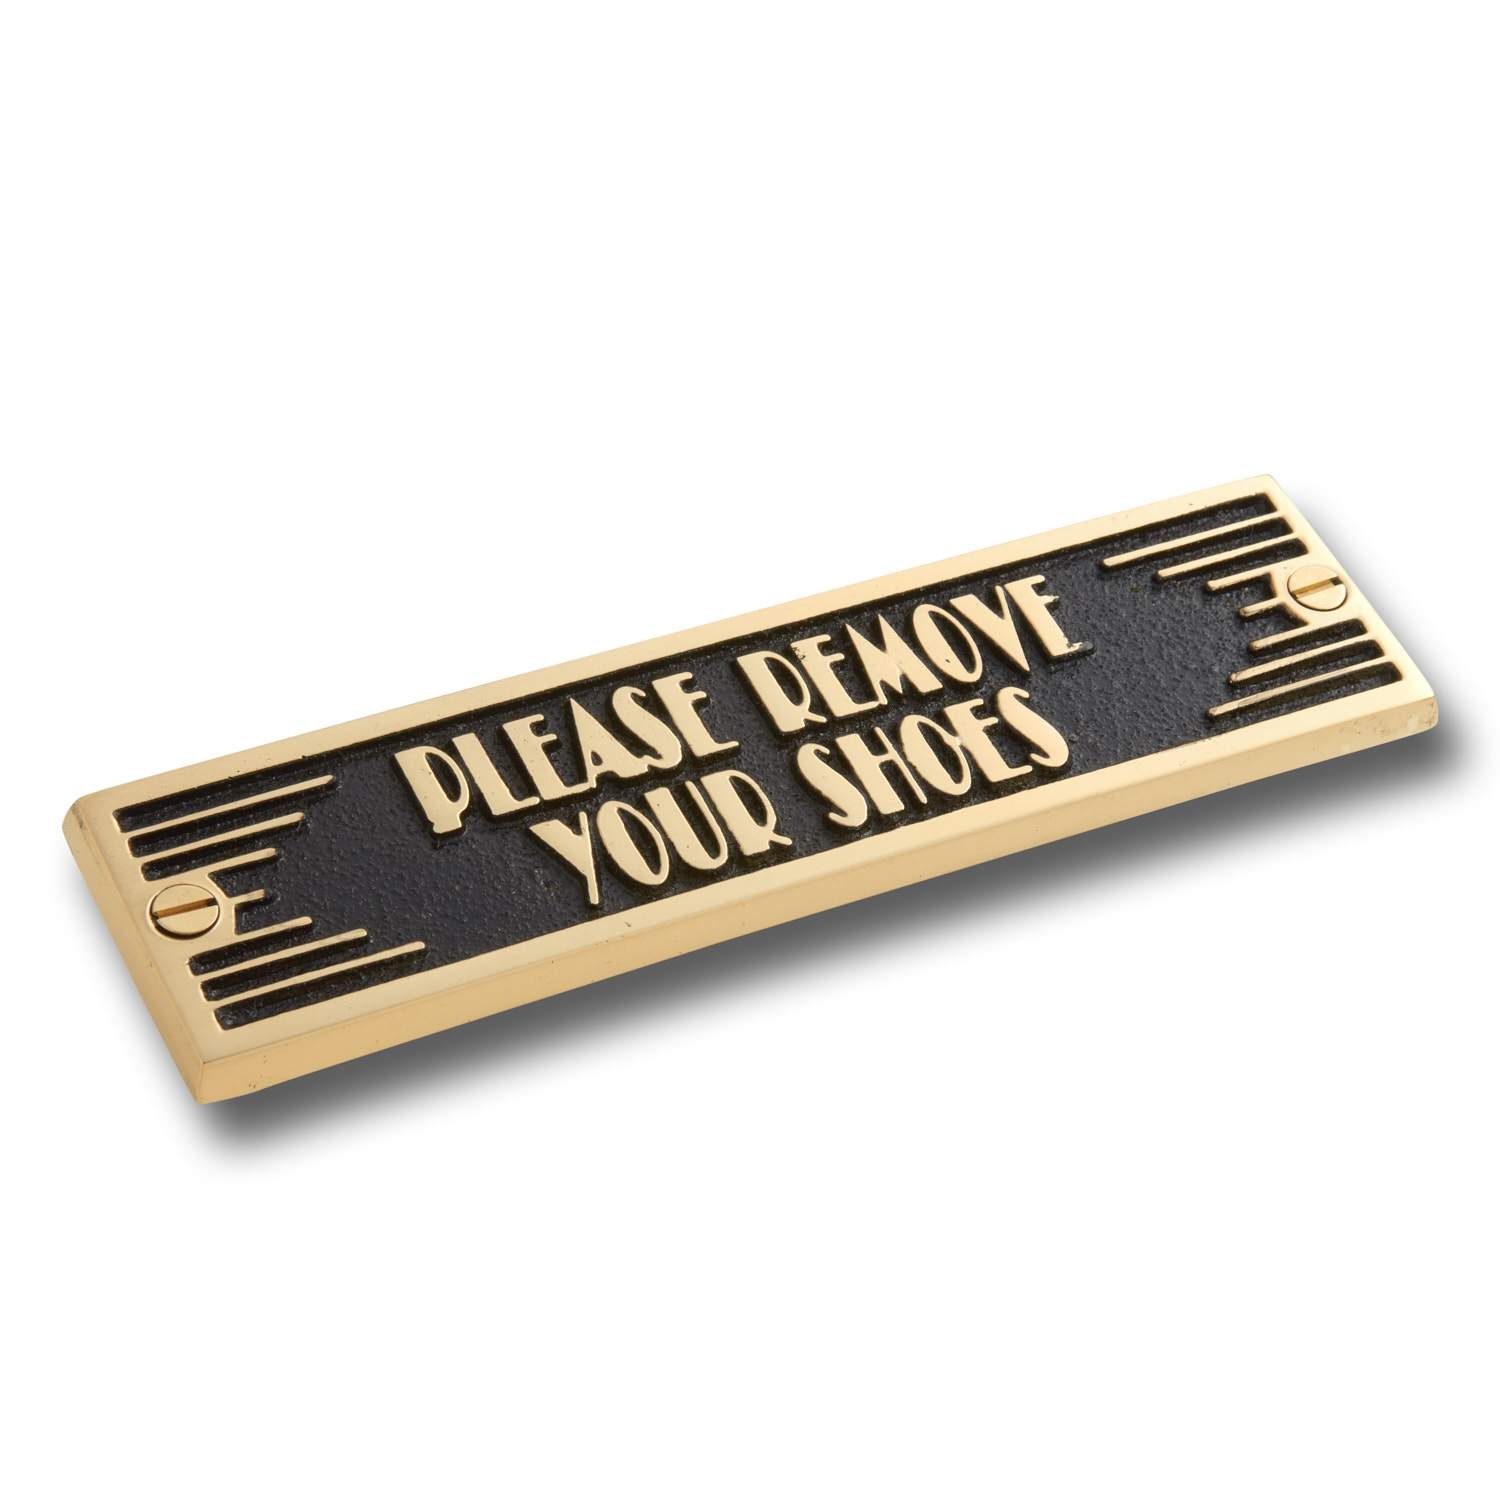 Please Remove Your Shoes Metal Door Sign.  Art Deco Style Home Décor Wall Plaque Accessories – Please Remove Your Shoes Brass